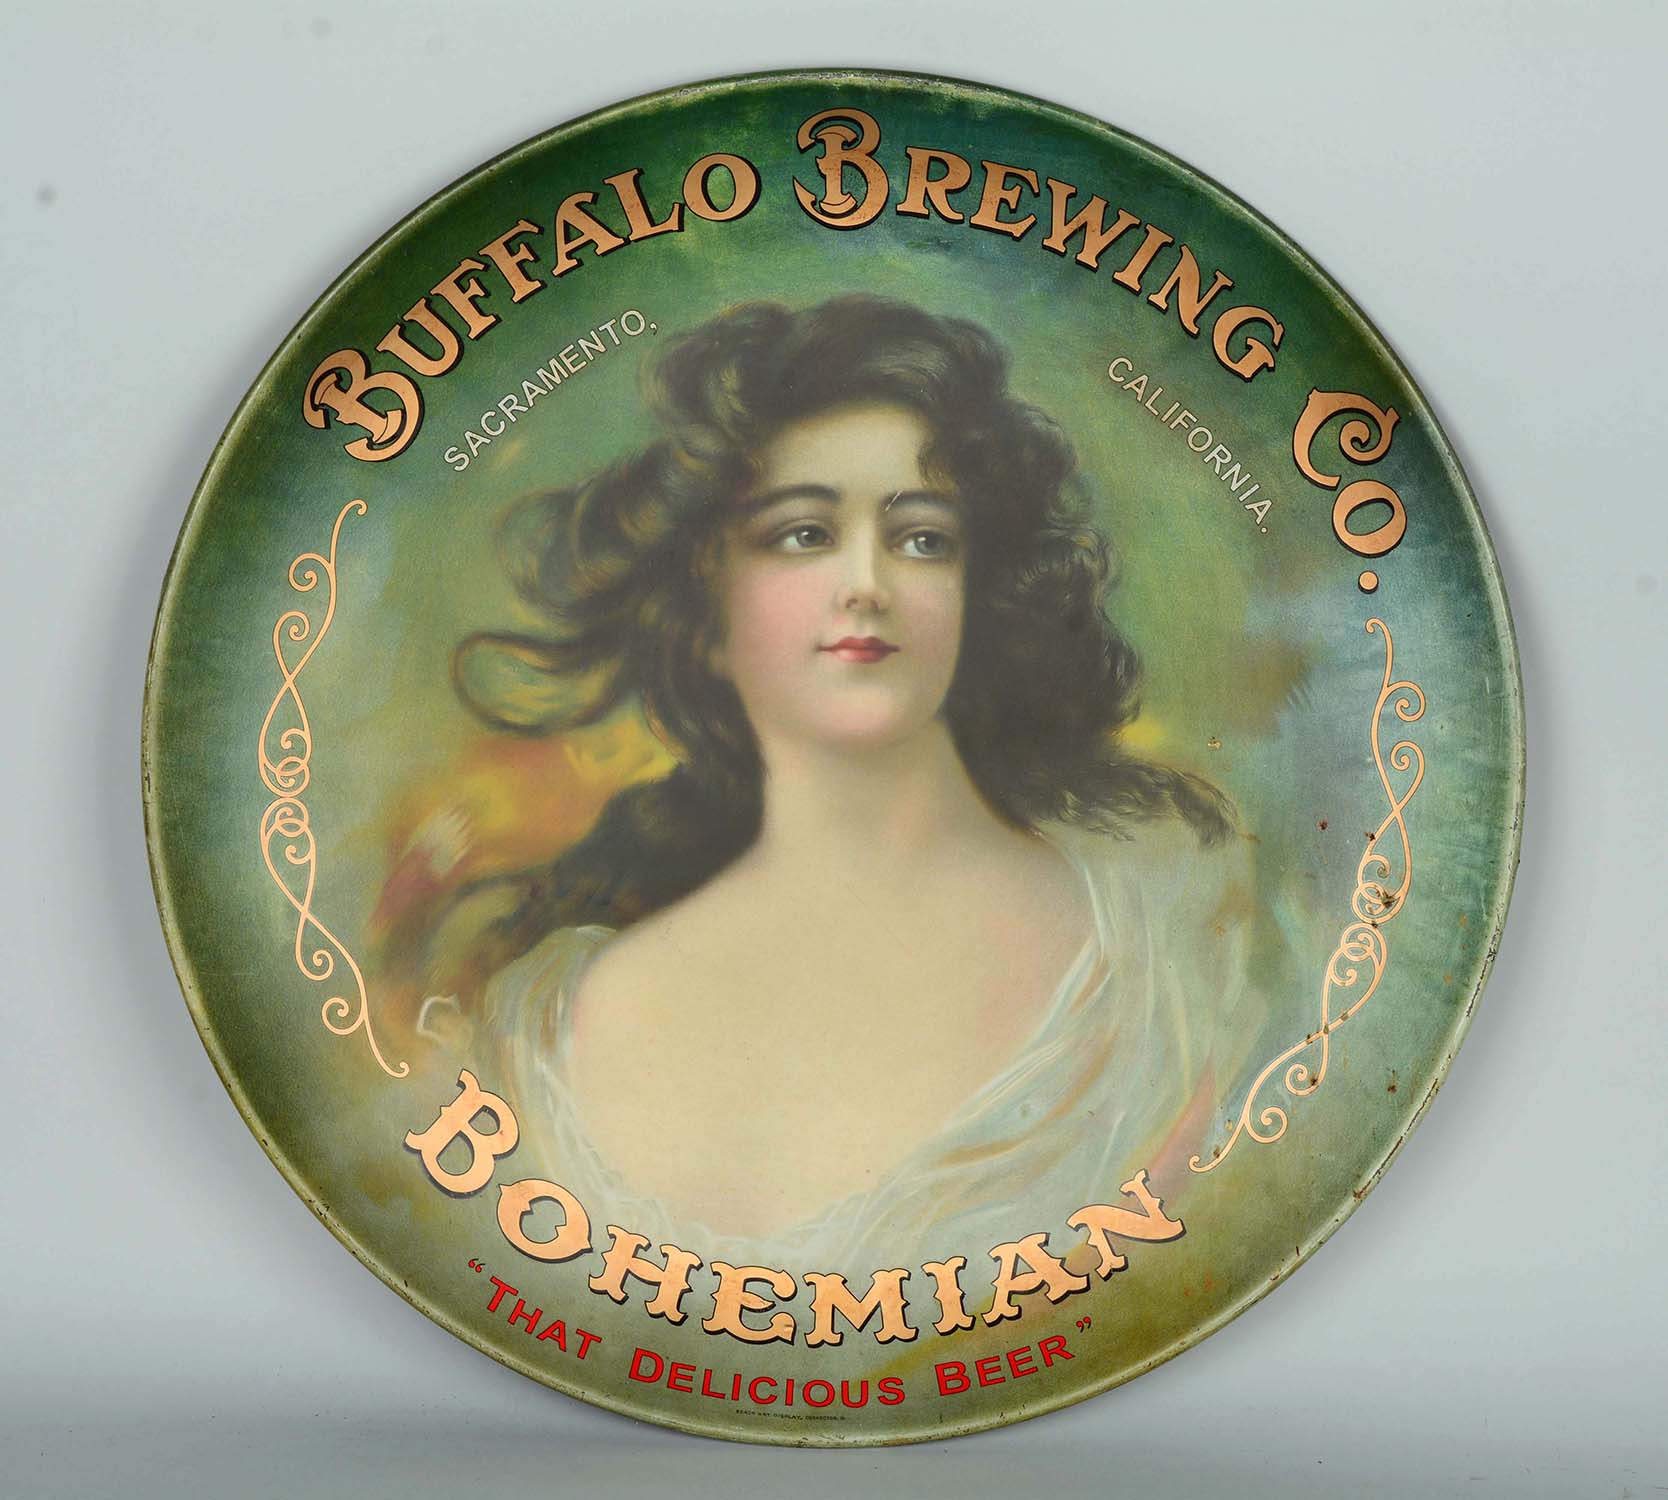 Buffalo Brewing Co. Bohemian Beer Charger, Estimated at $5,000-8,000.